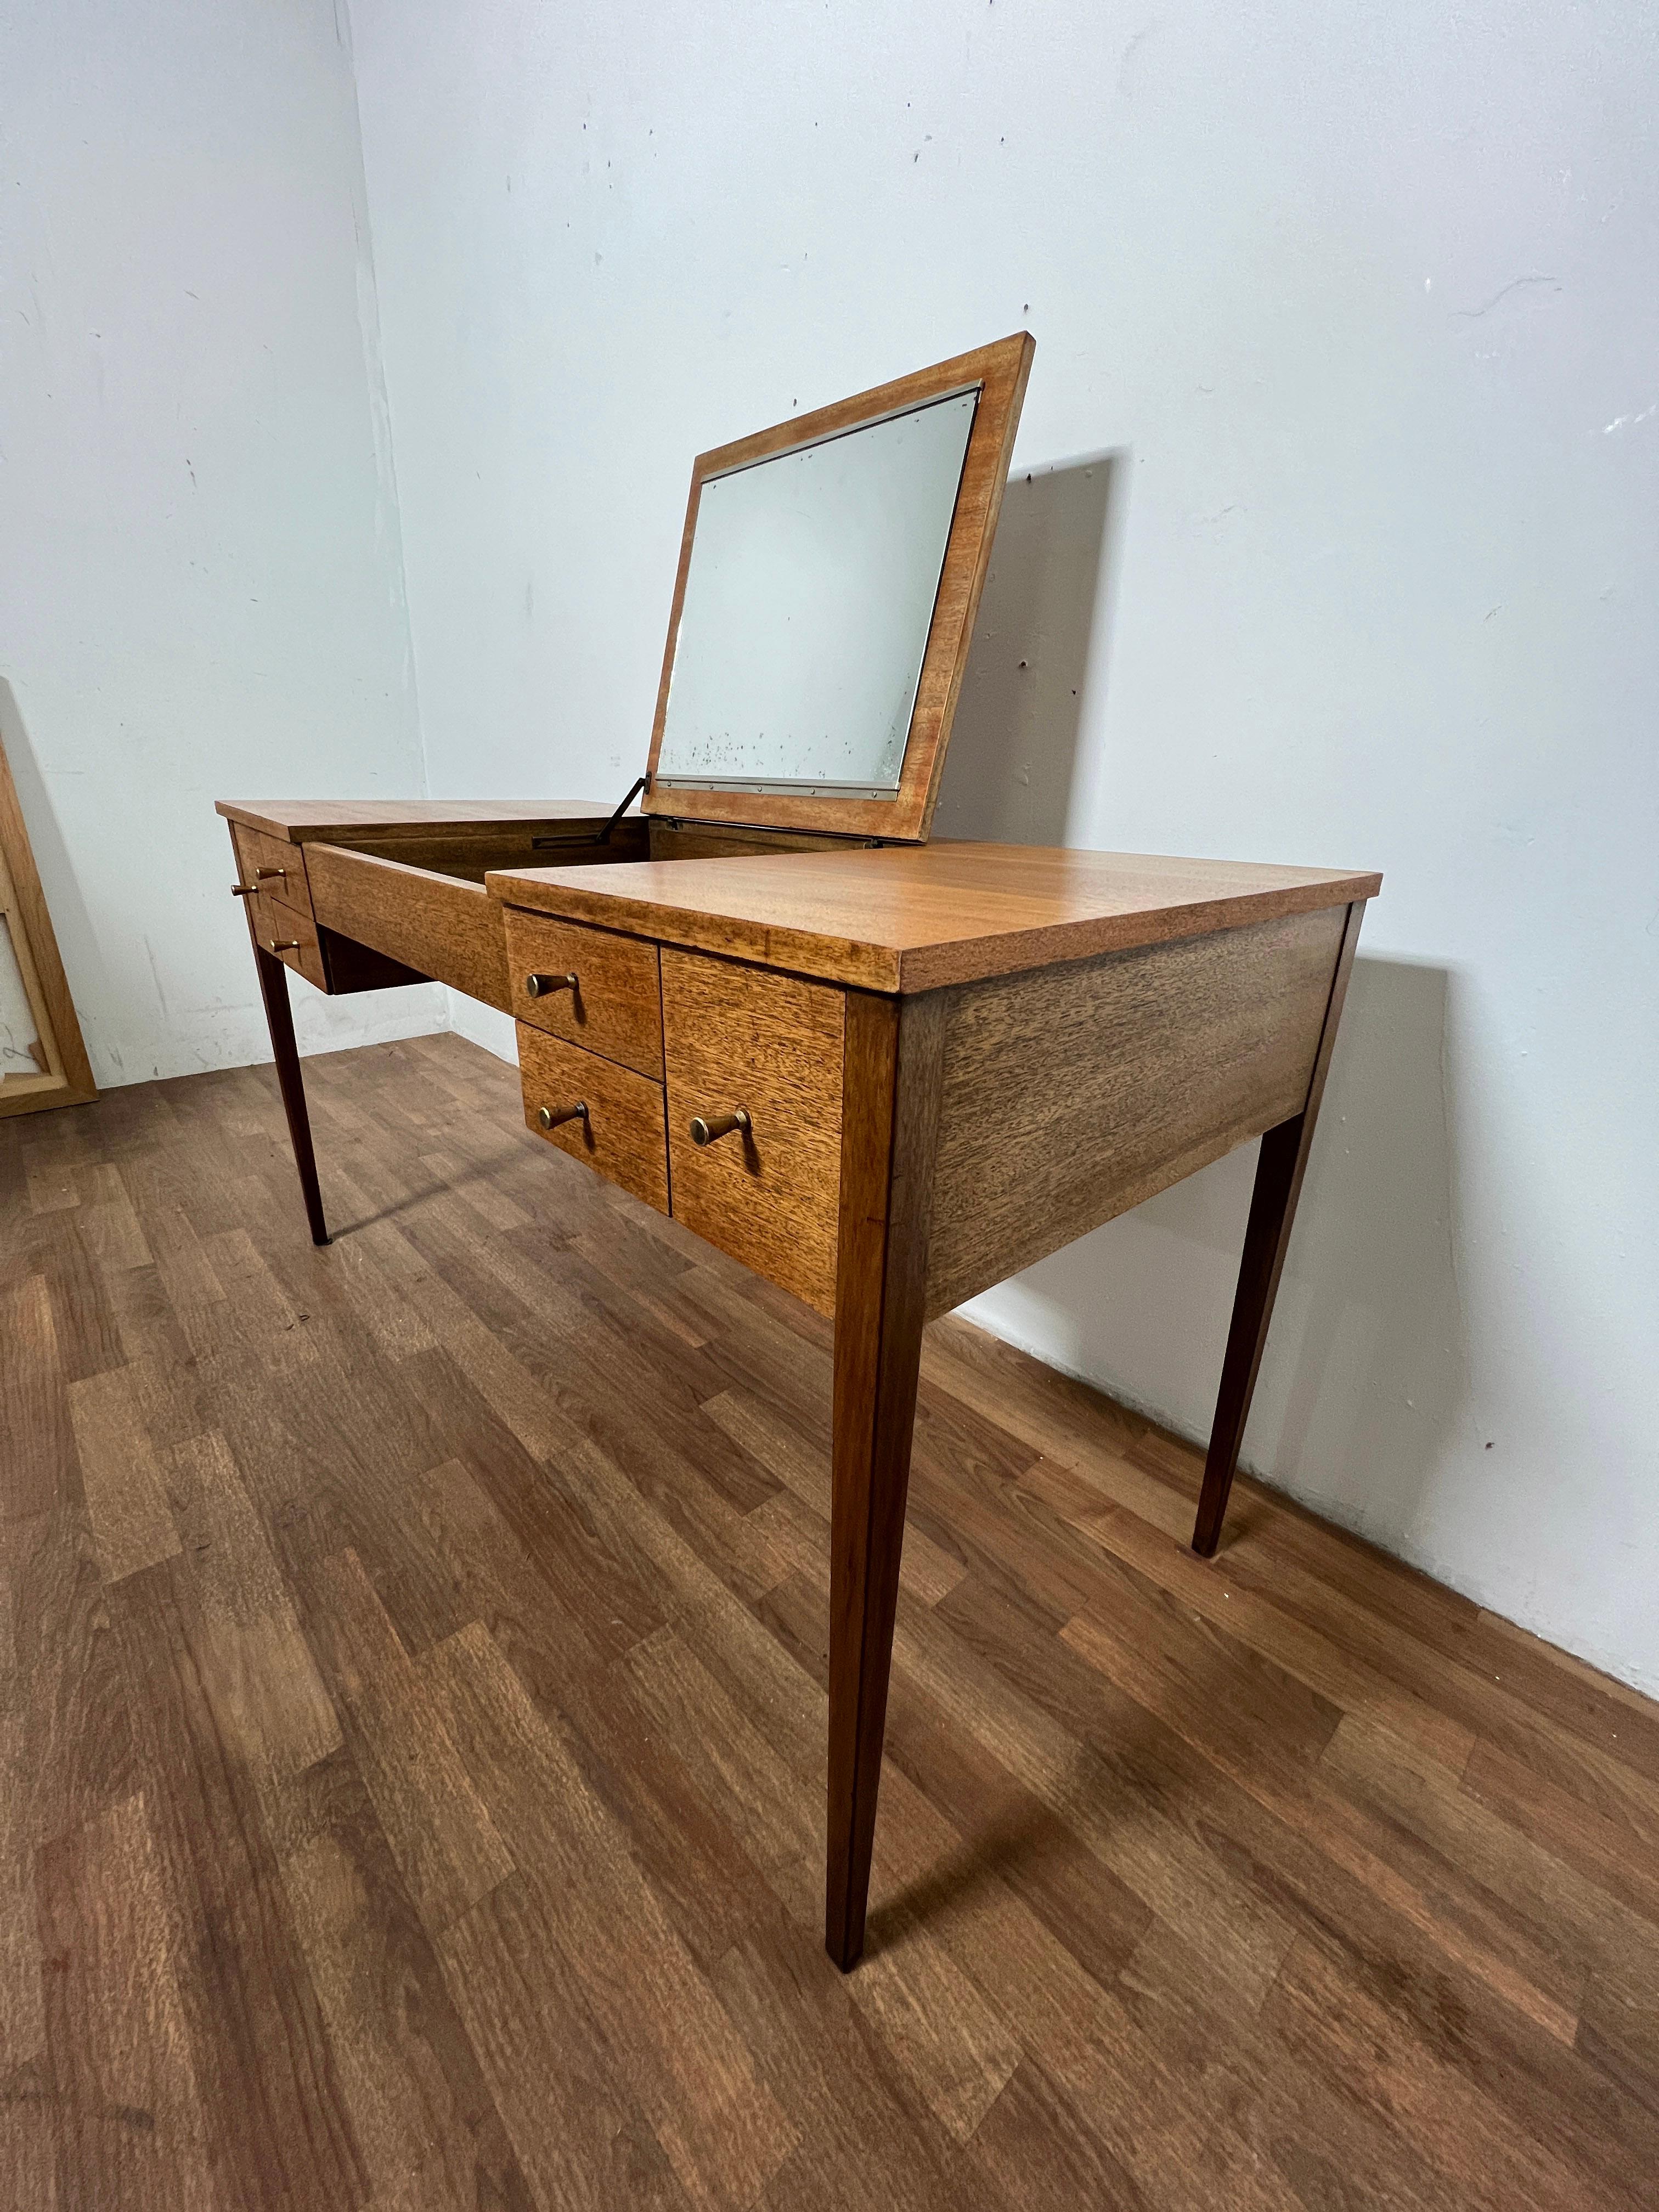 Mid-20th Century Paul McCobb Vanity Table for Calvin, Irwin Collection, Circa 1950s For Sale